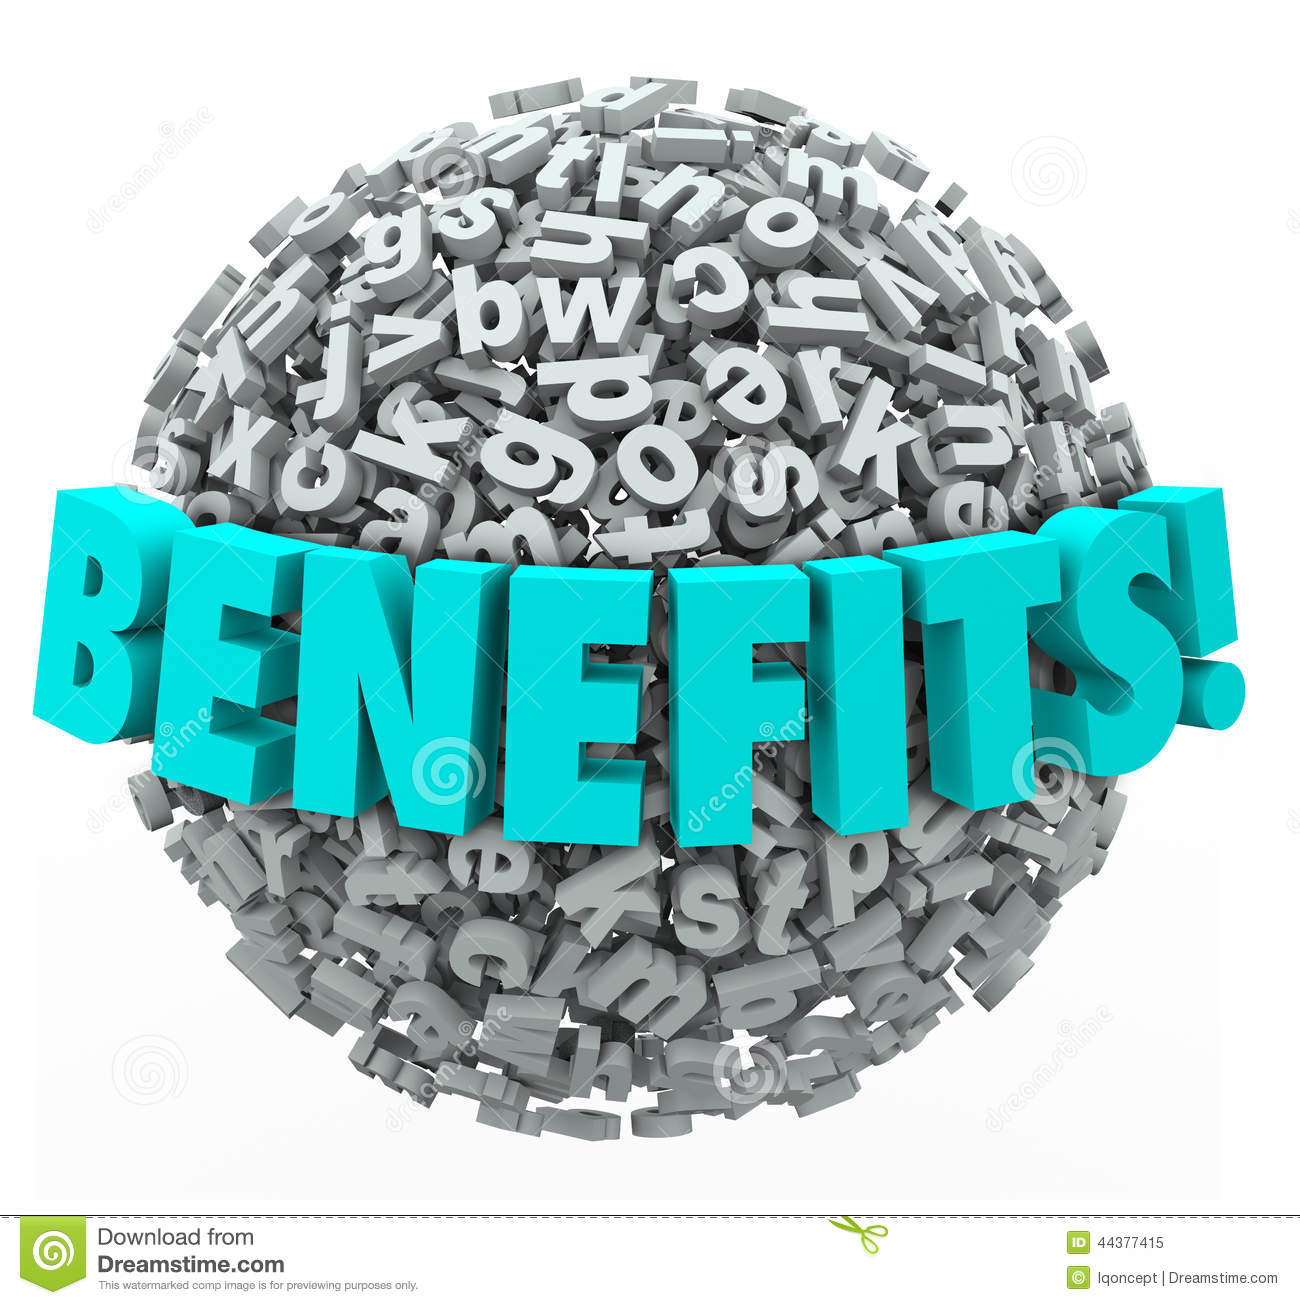 Benefits Word In 3d Letters On A Ball Or Sphere Illustrating The Many